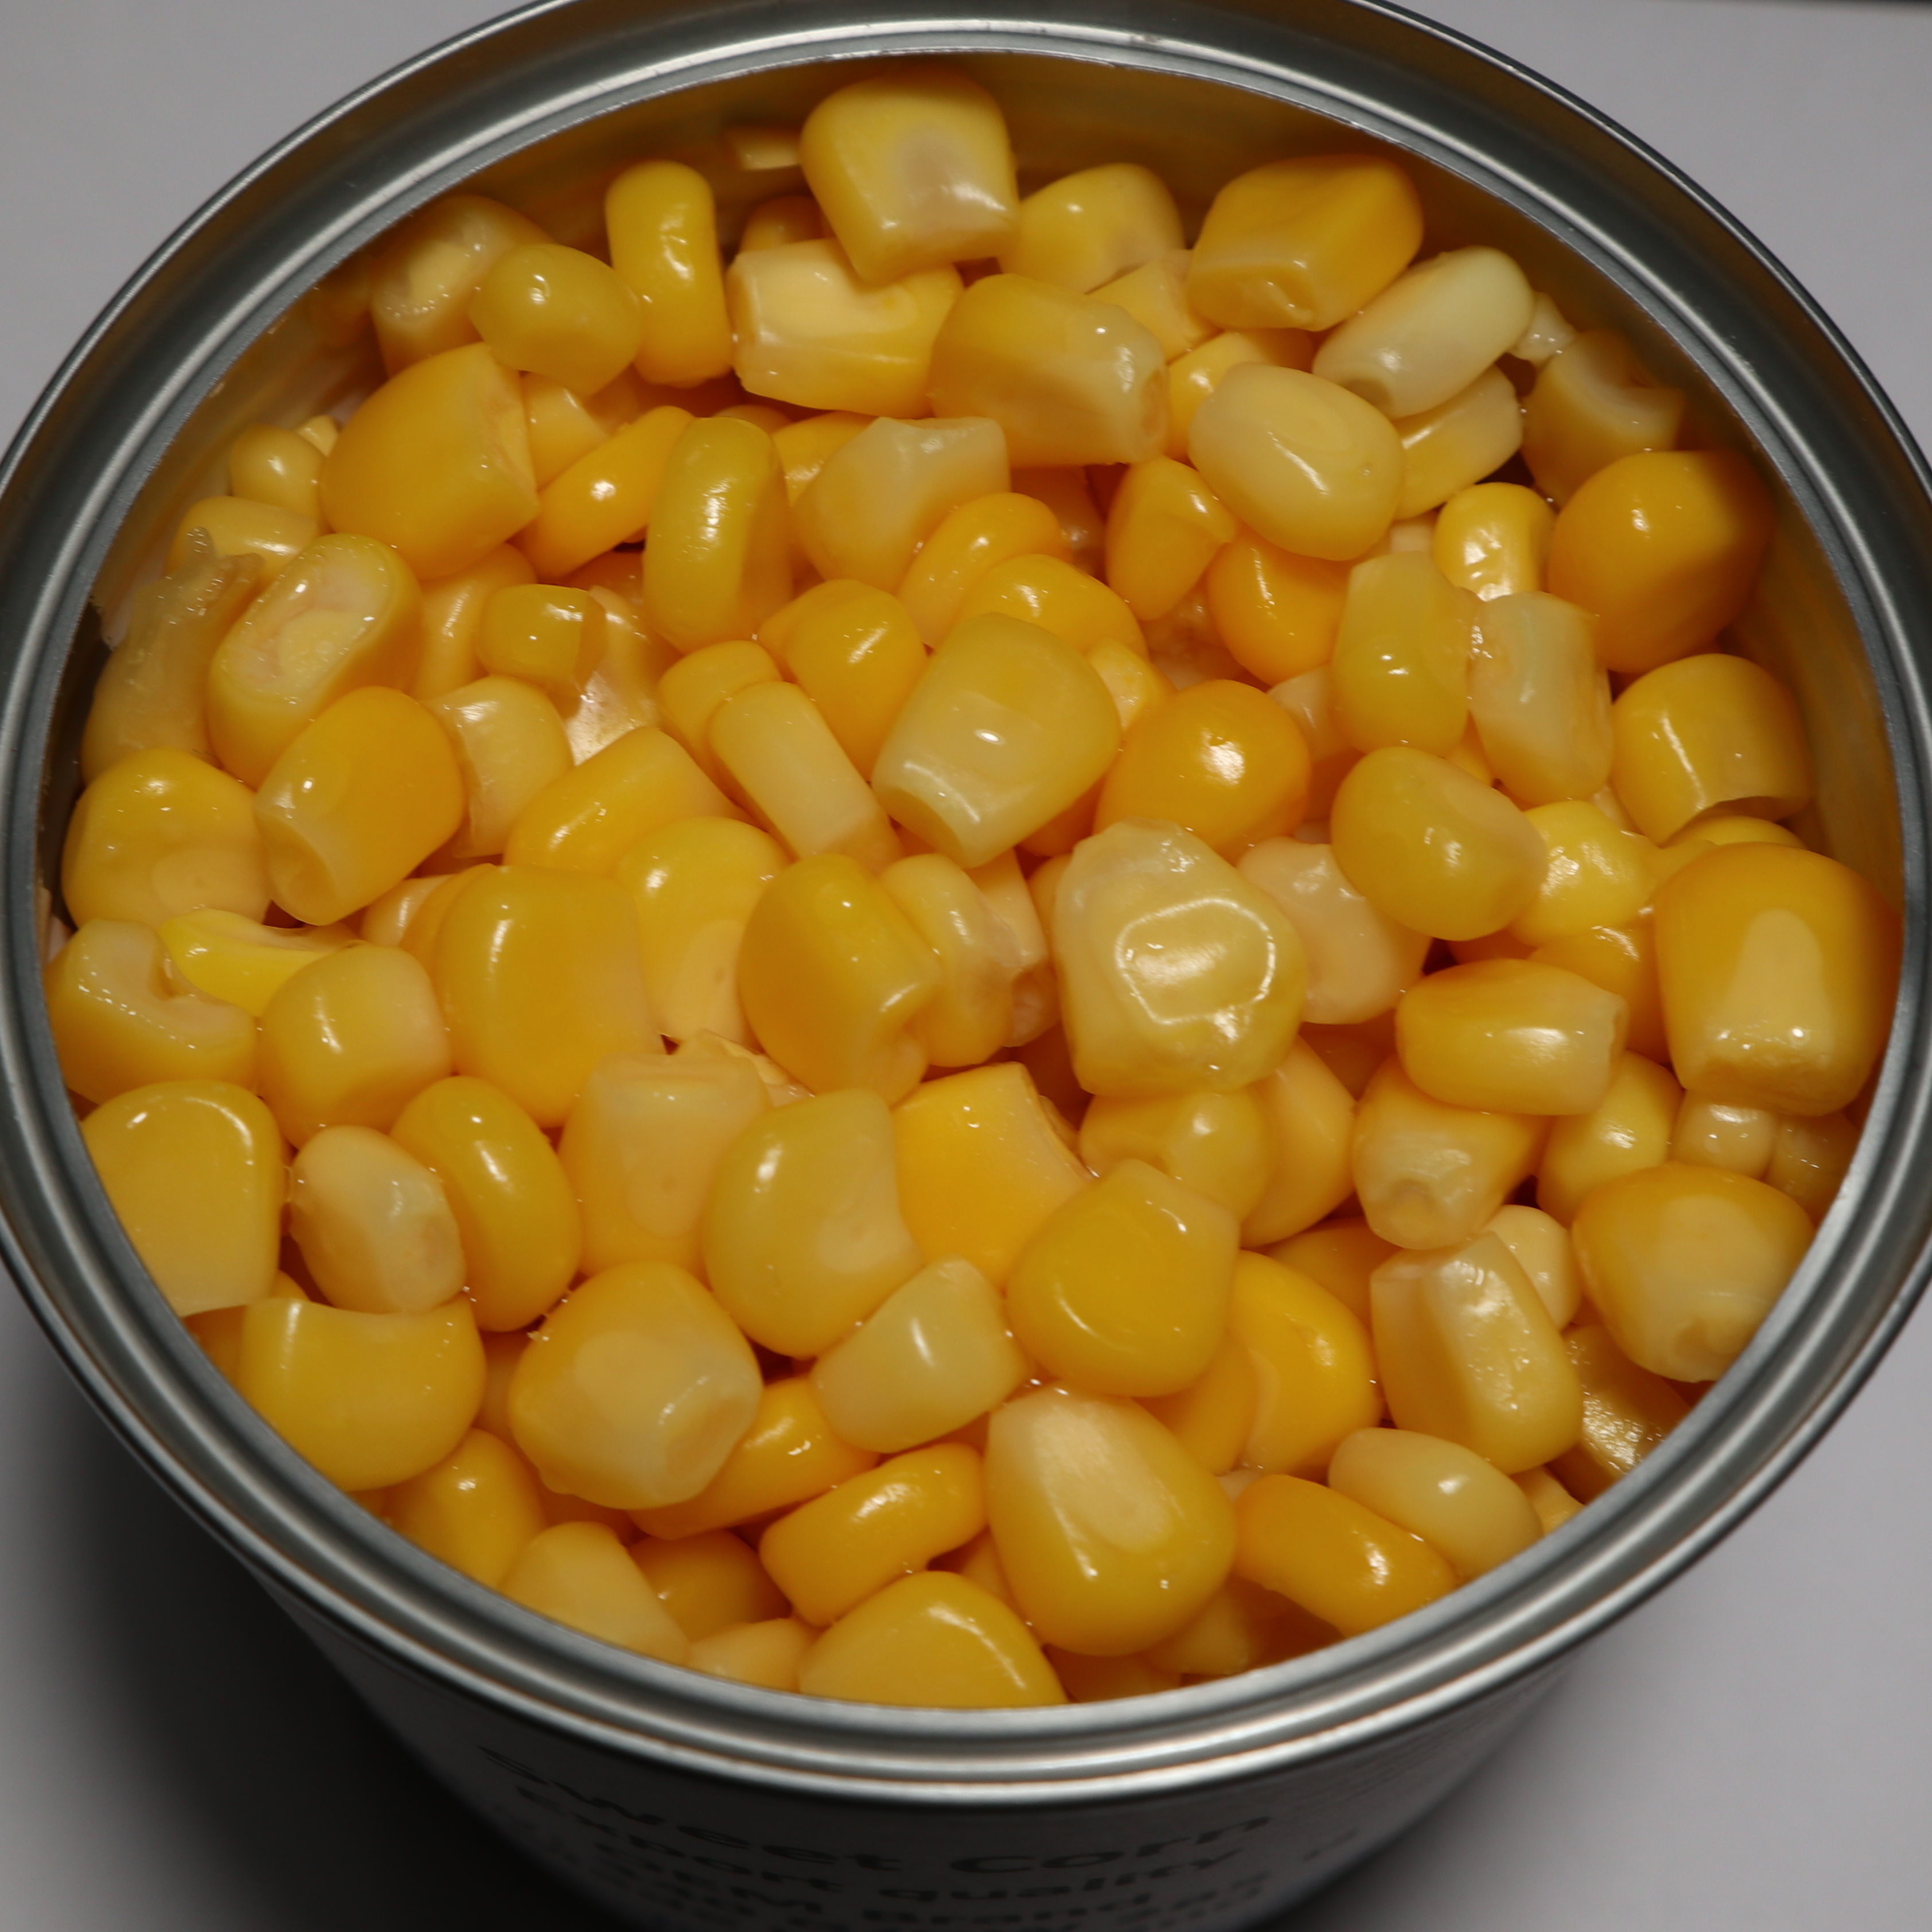 Quality Whoke Kernel Corn Canned Sweet corn available in two styles of kernel in Brine or Cream style corn